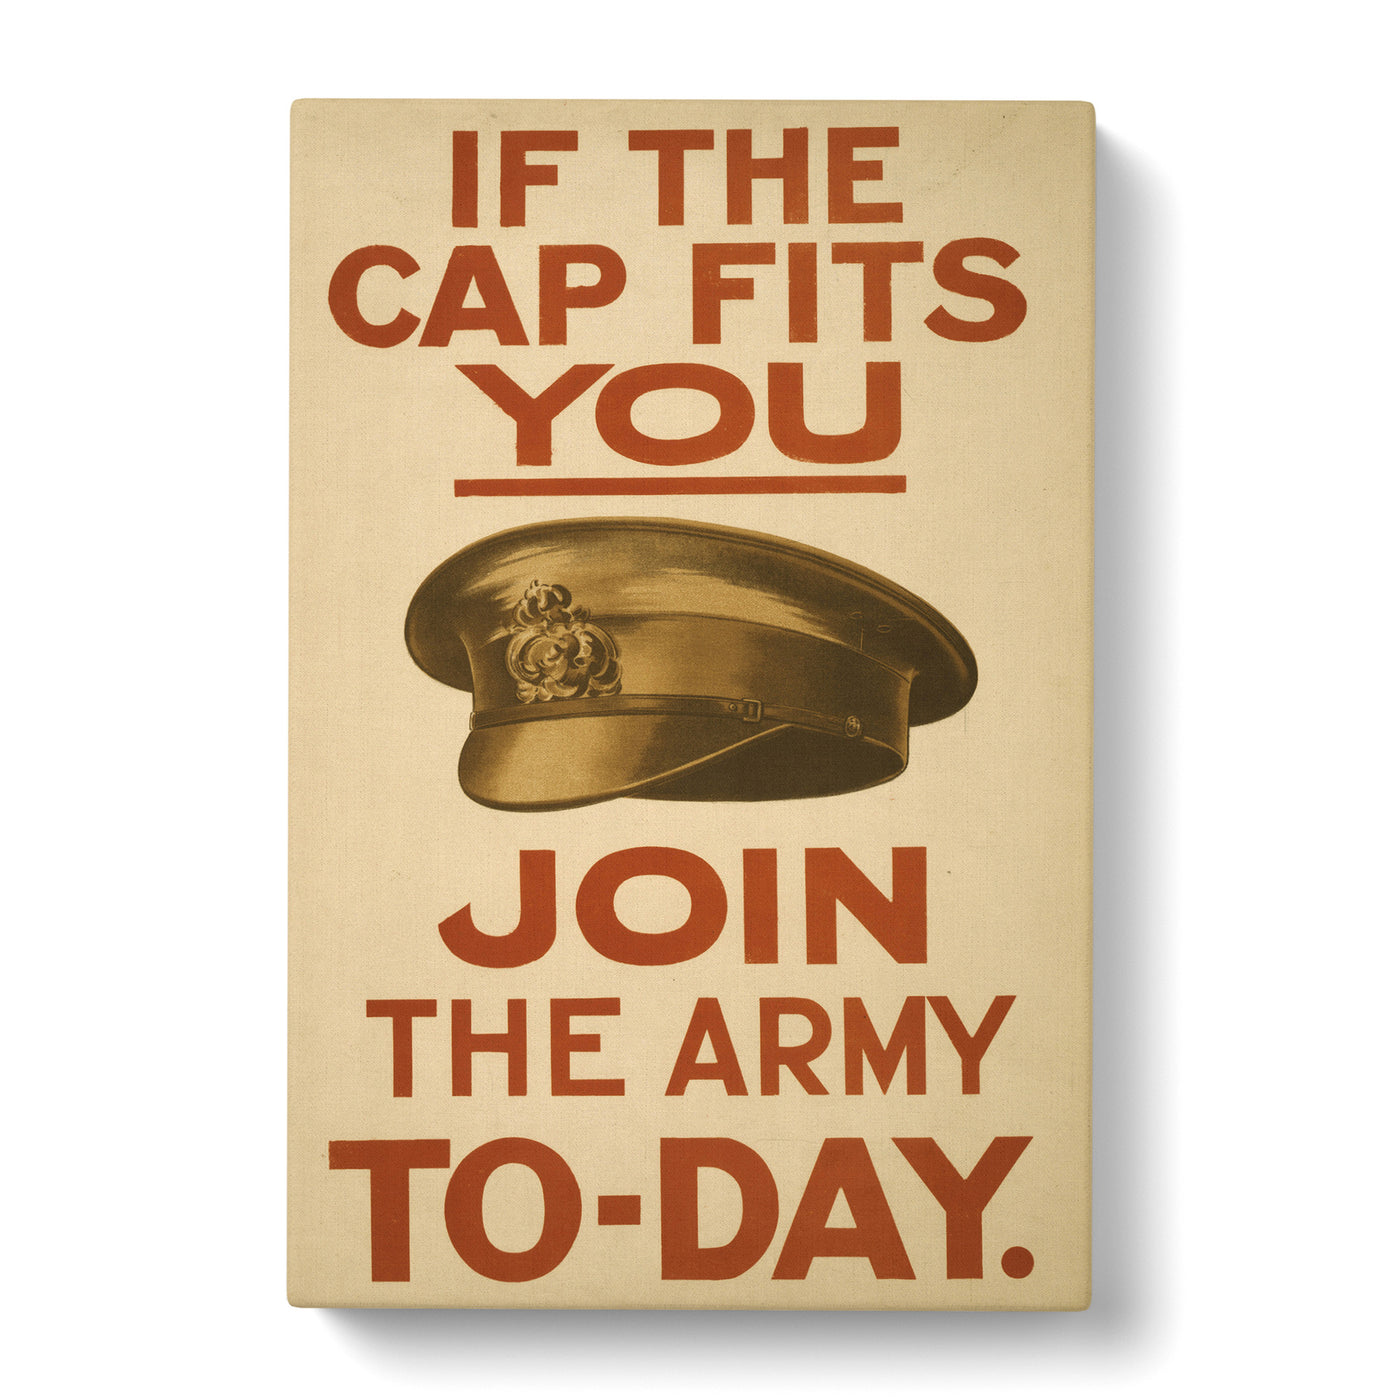 Vintage Join The Army Advertisementcan Canvas Print Main Image